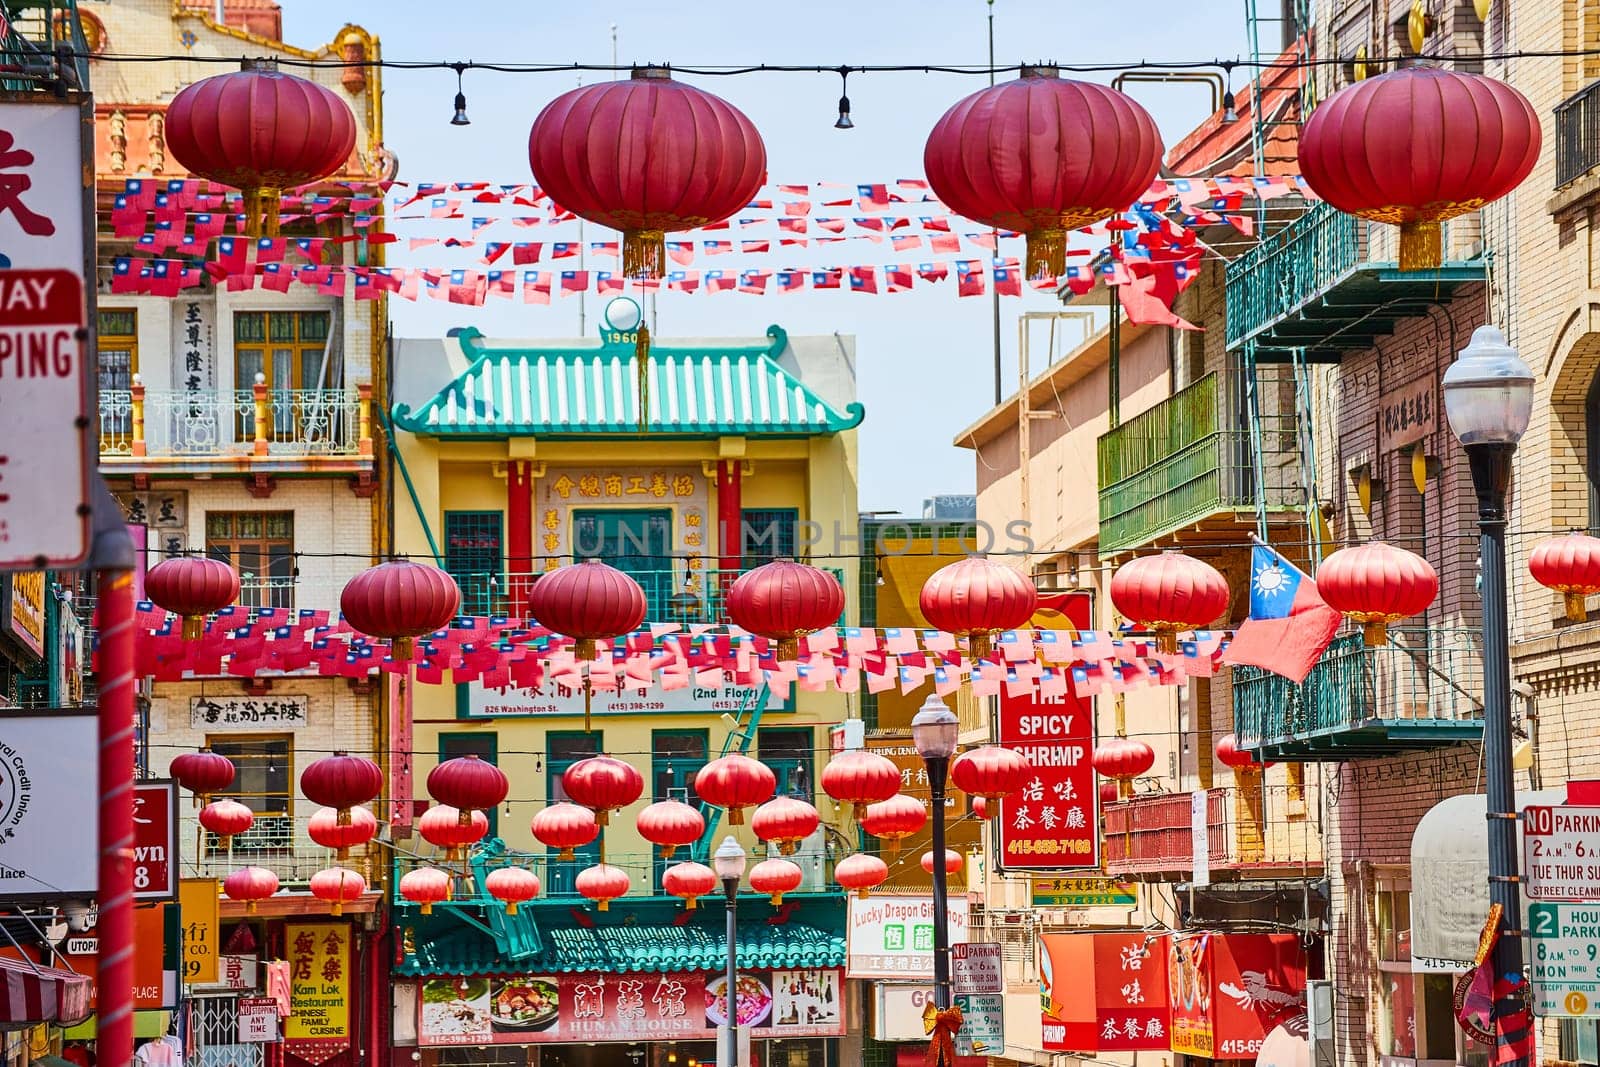 Image of Red paper lanterns with Chinese and American flags strung across road in Chinatown